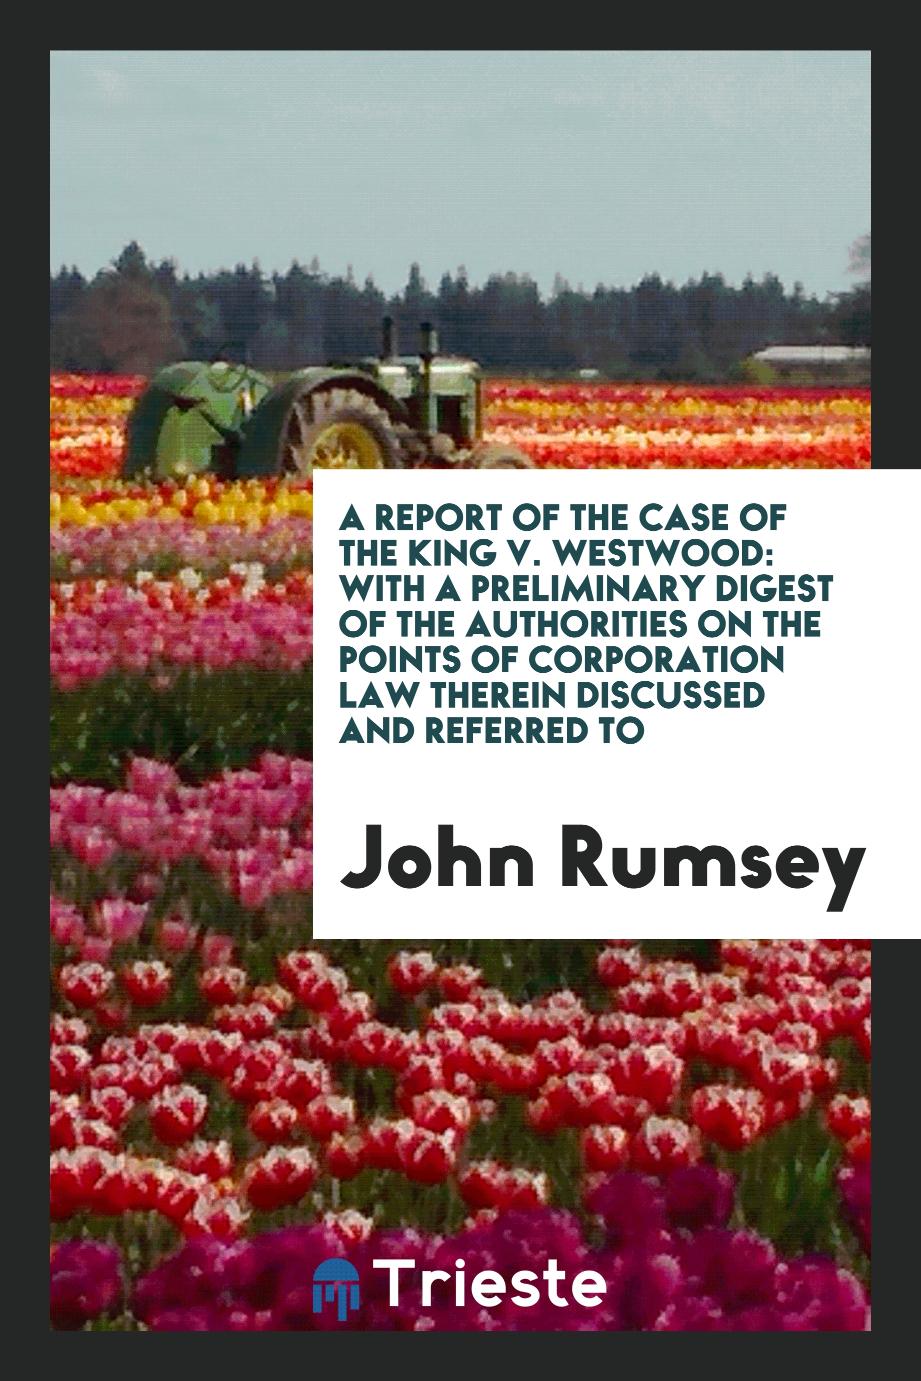 A Report of the Case of the King V. Westwood: With a Preliminary Digest of the Authorities on the Points of Corporation Law Therein Discussed and Referred to